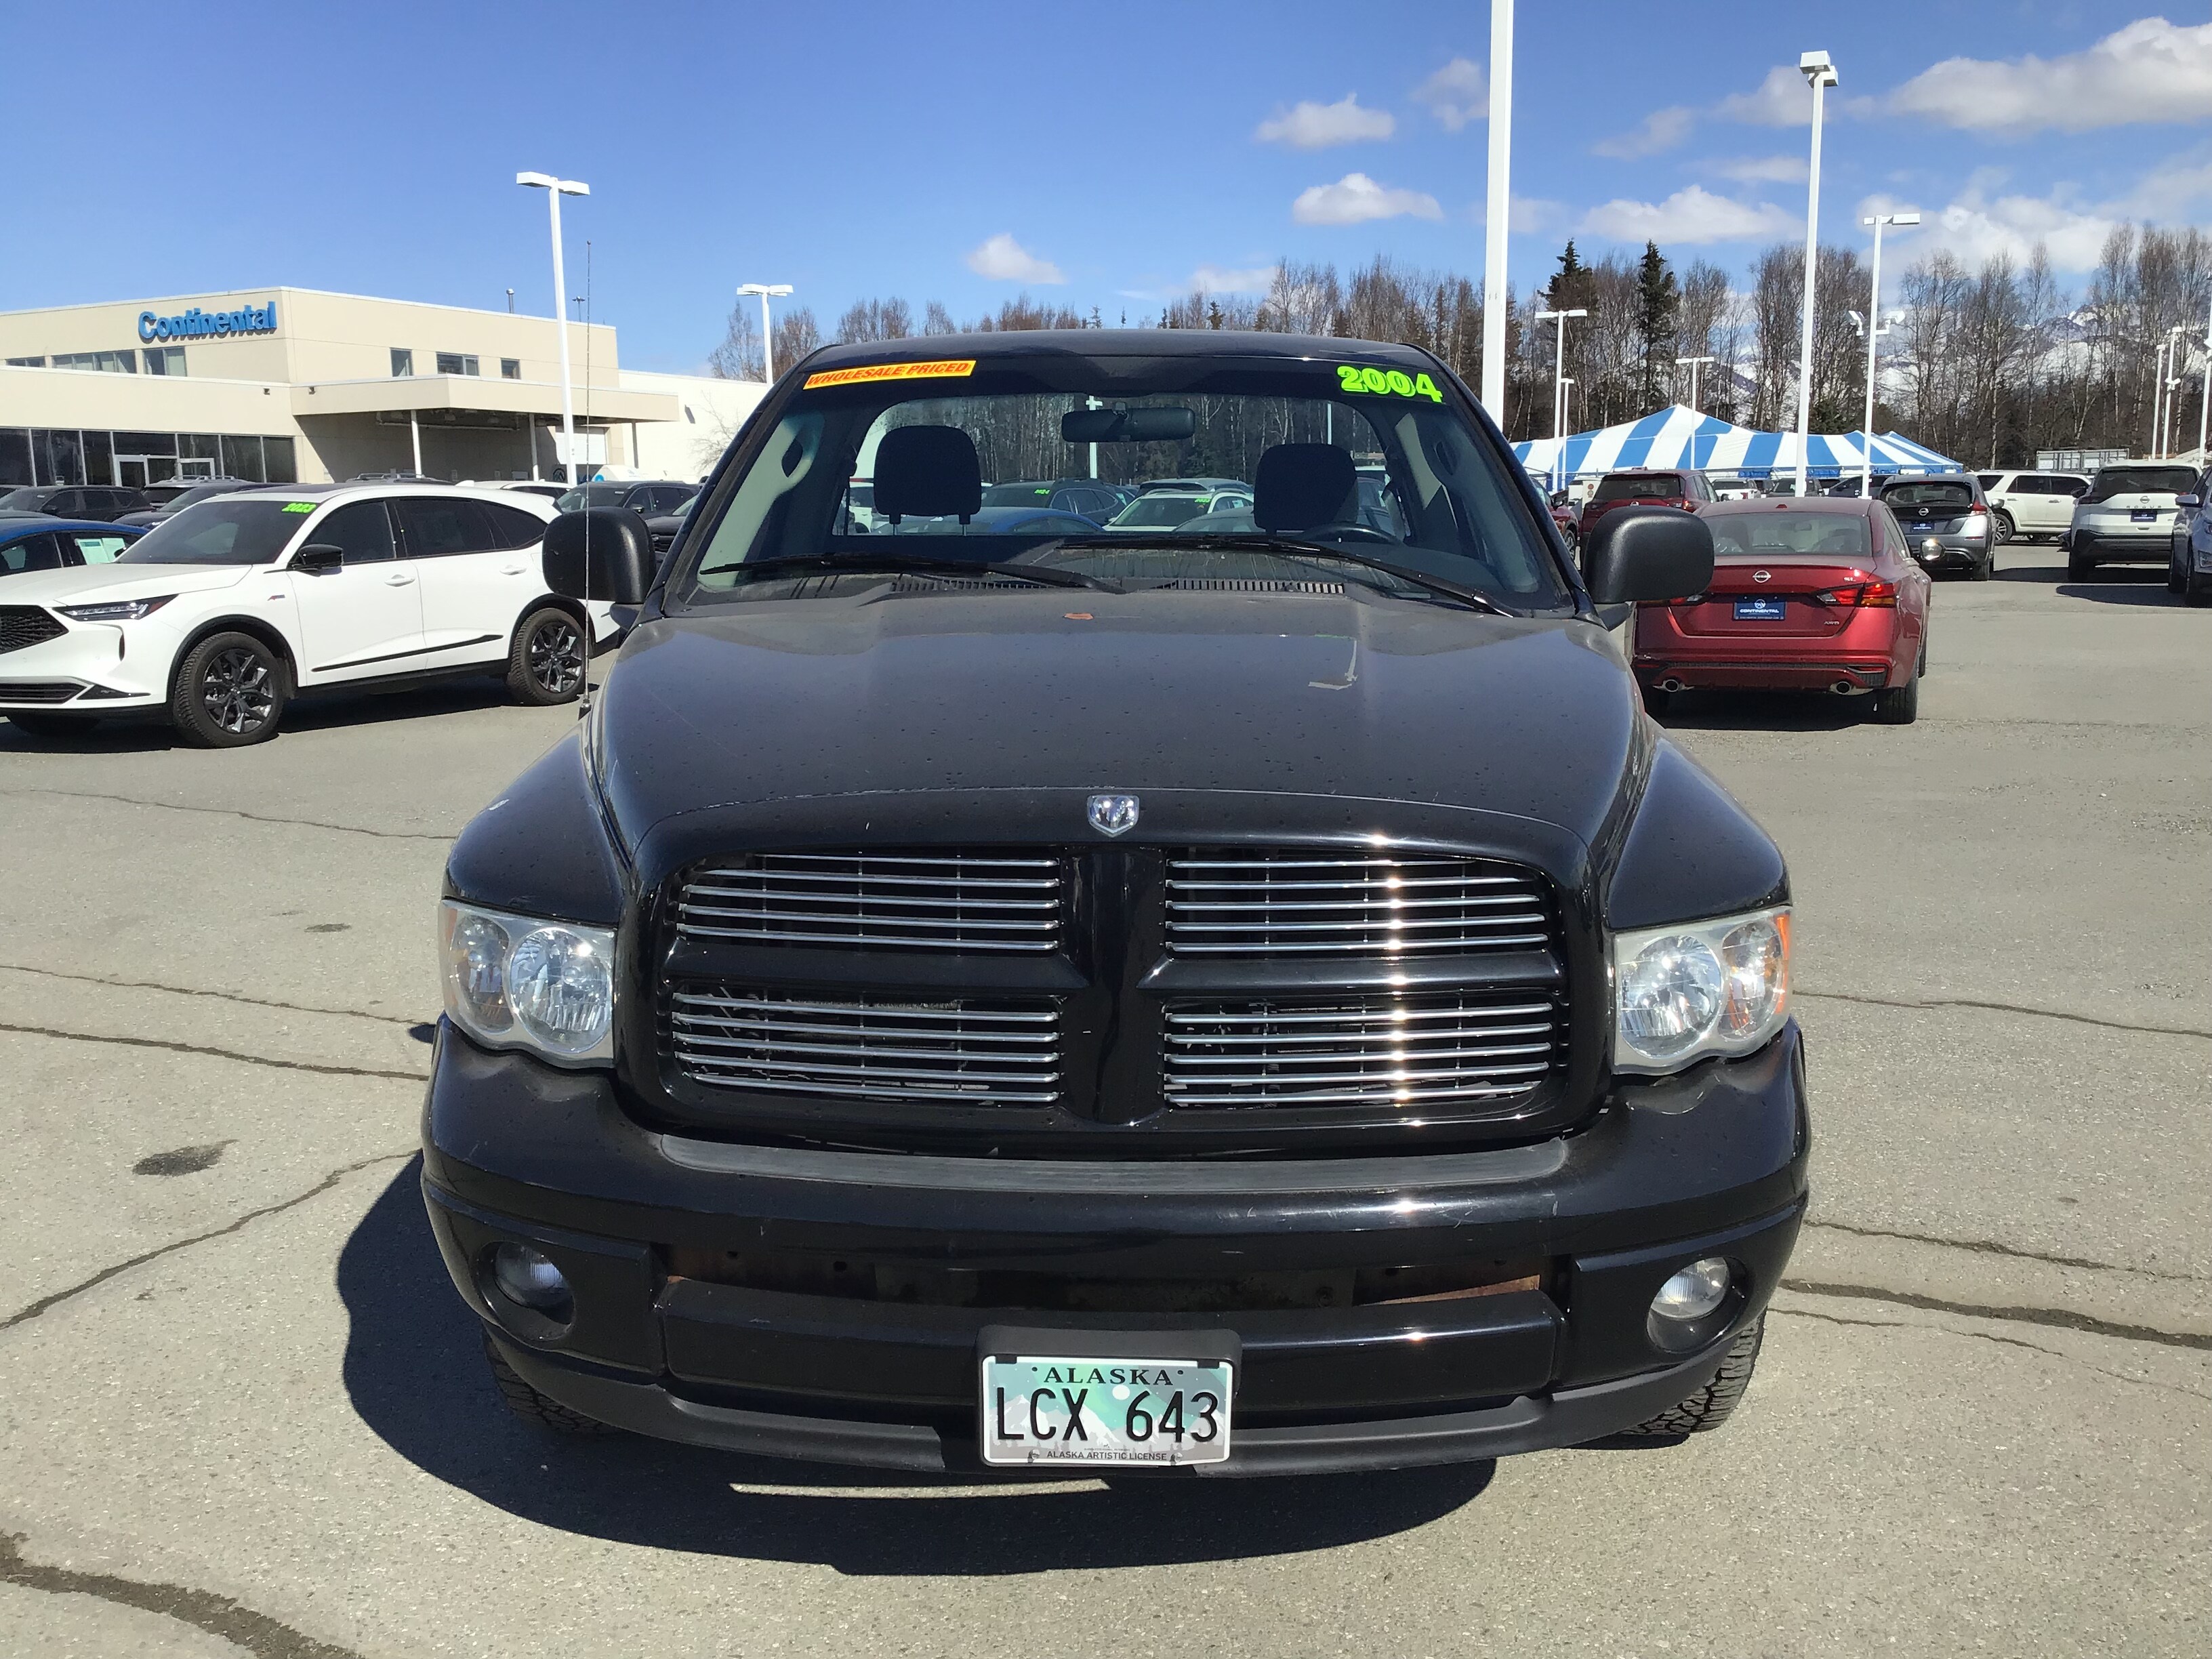 Used 2004 Dodge Ram 1500 Pickup SLT with VIN 1D7HU16D04J168797 for sale in Anchorage, AK